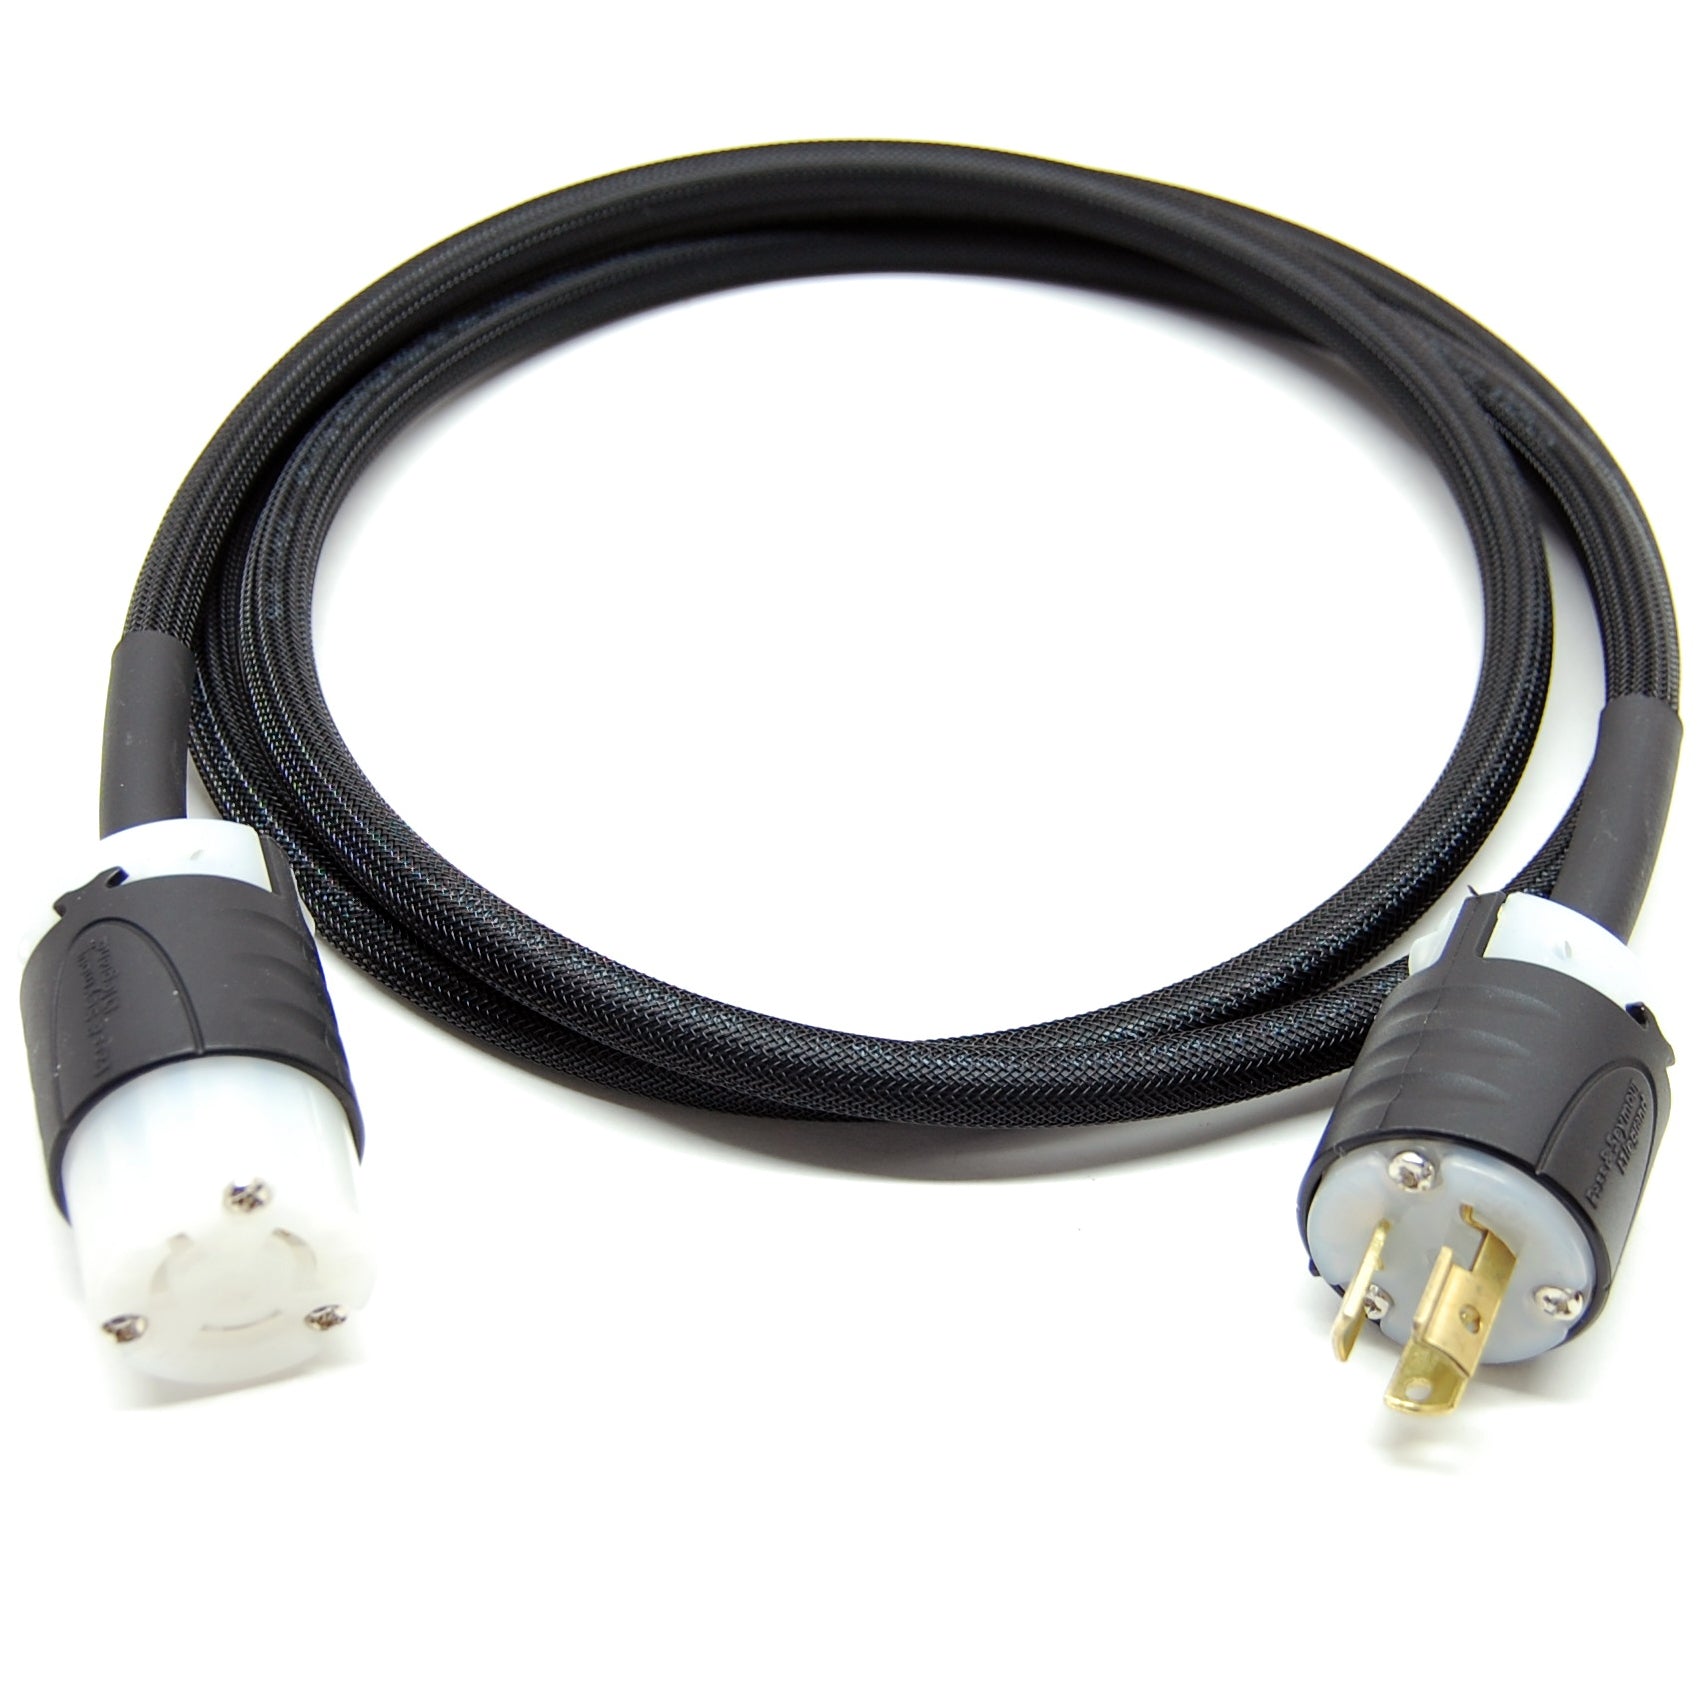 Extension cord for 240V pump with twist lock plug (L6-15R to L6-15P) - The  Electric Brewery